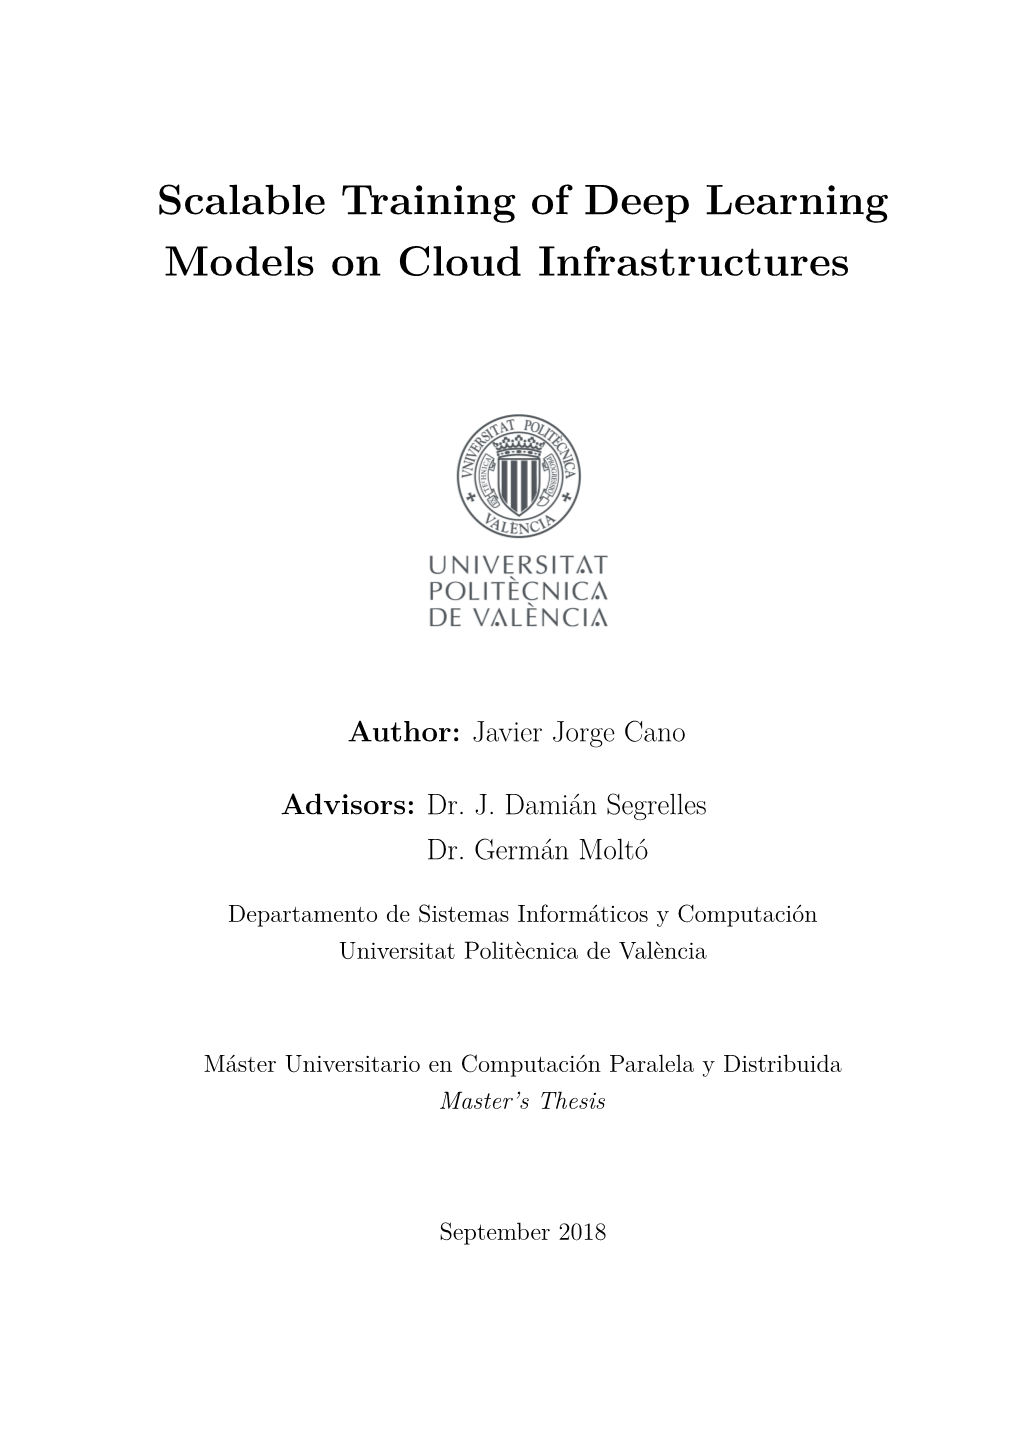 Scalable Training of Deep Learning Models on Cloud Infrastructures